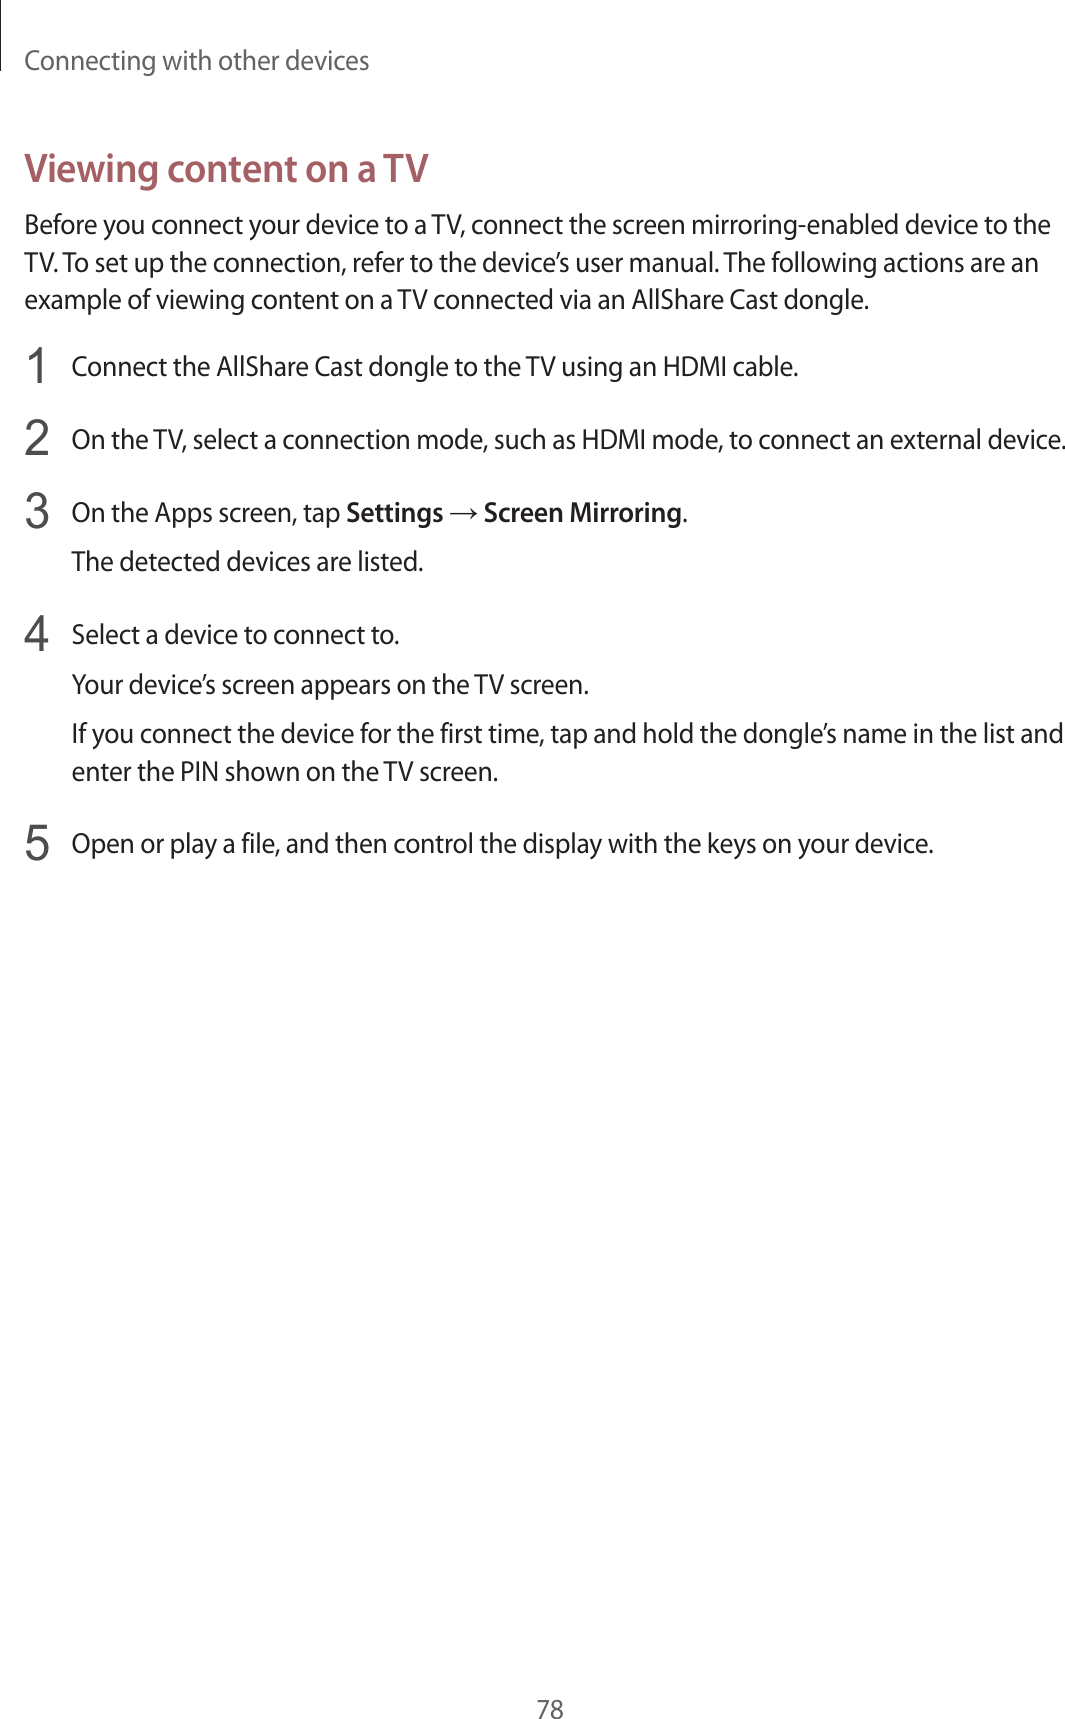 Connecting with other devices78Viewing content on a TVBefore you connect your device to a TV, connect the screen mirroring-enabled device to the TV. To set up the connection, refer to the device’s user manual. The following actions are an example of viewing content on a TV connected via an AllShare Cast dongle.1  Connect the AllShare Cast dongle to the TV using an HDMI cable.2  On the TV, select a connection mode, such as HDMI mode, to connect an external device.3  On the Apps screen, tap Settings → Screen Mirroring.The detected devices are listed.4  Select a device to connect to.Your device’s screen appears on the TV screen.If you connect the device for the first time, tap and hold the dongle’s name in the list and enter the PIN shown on the TV screen.5  Open or play a file, and then control the display with the keys on your device.